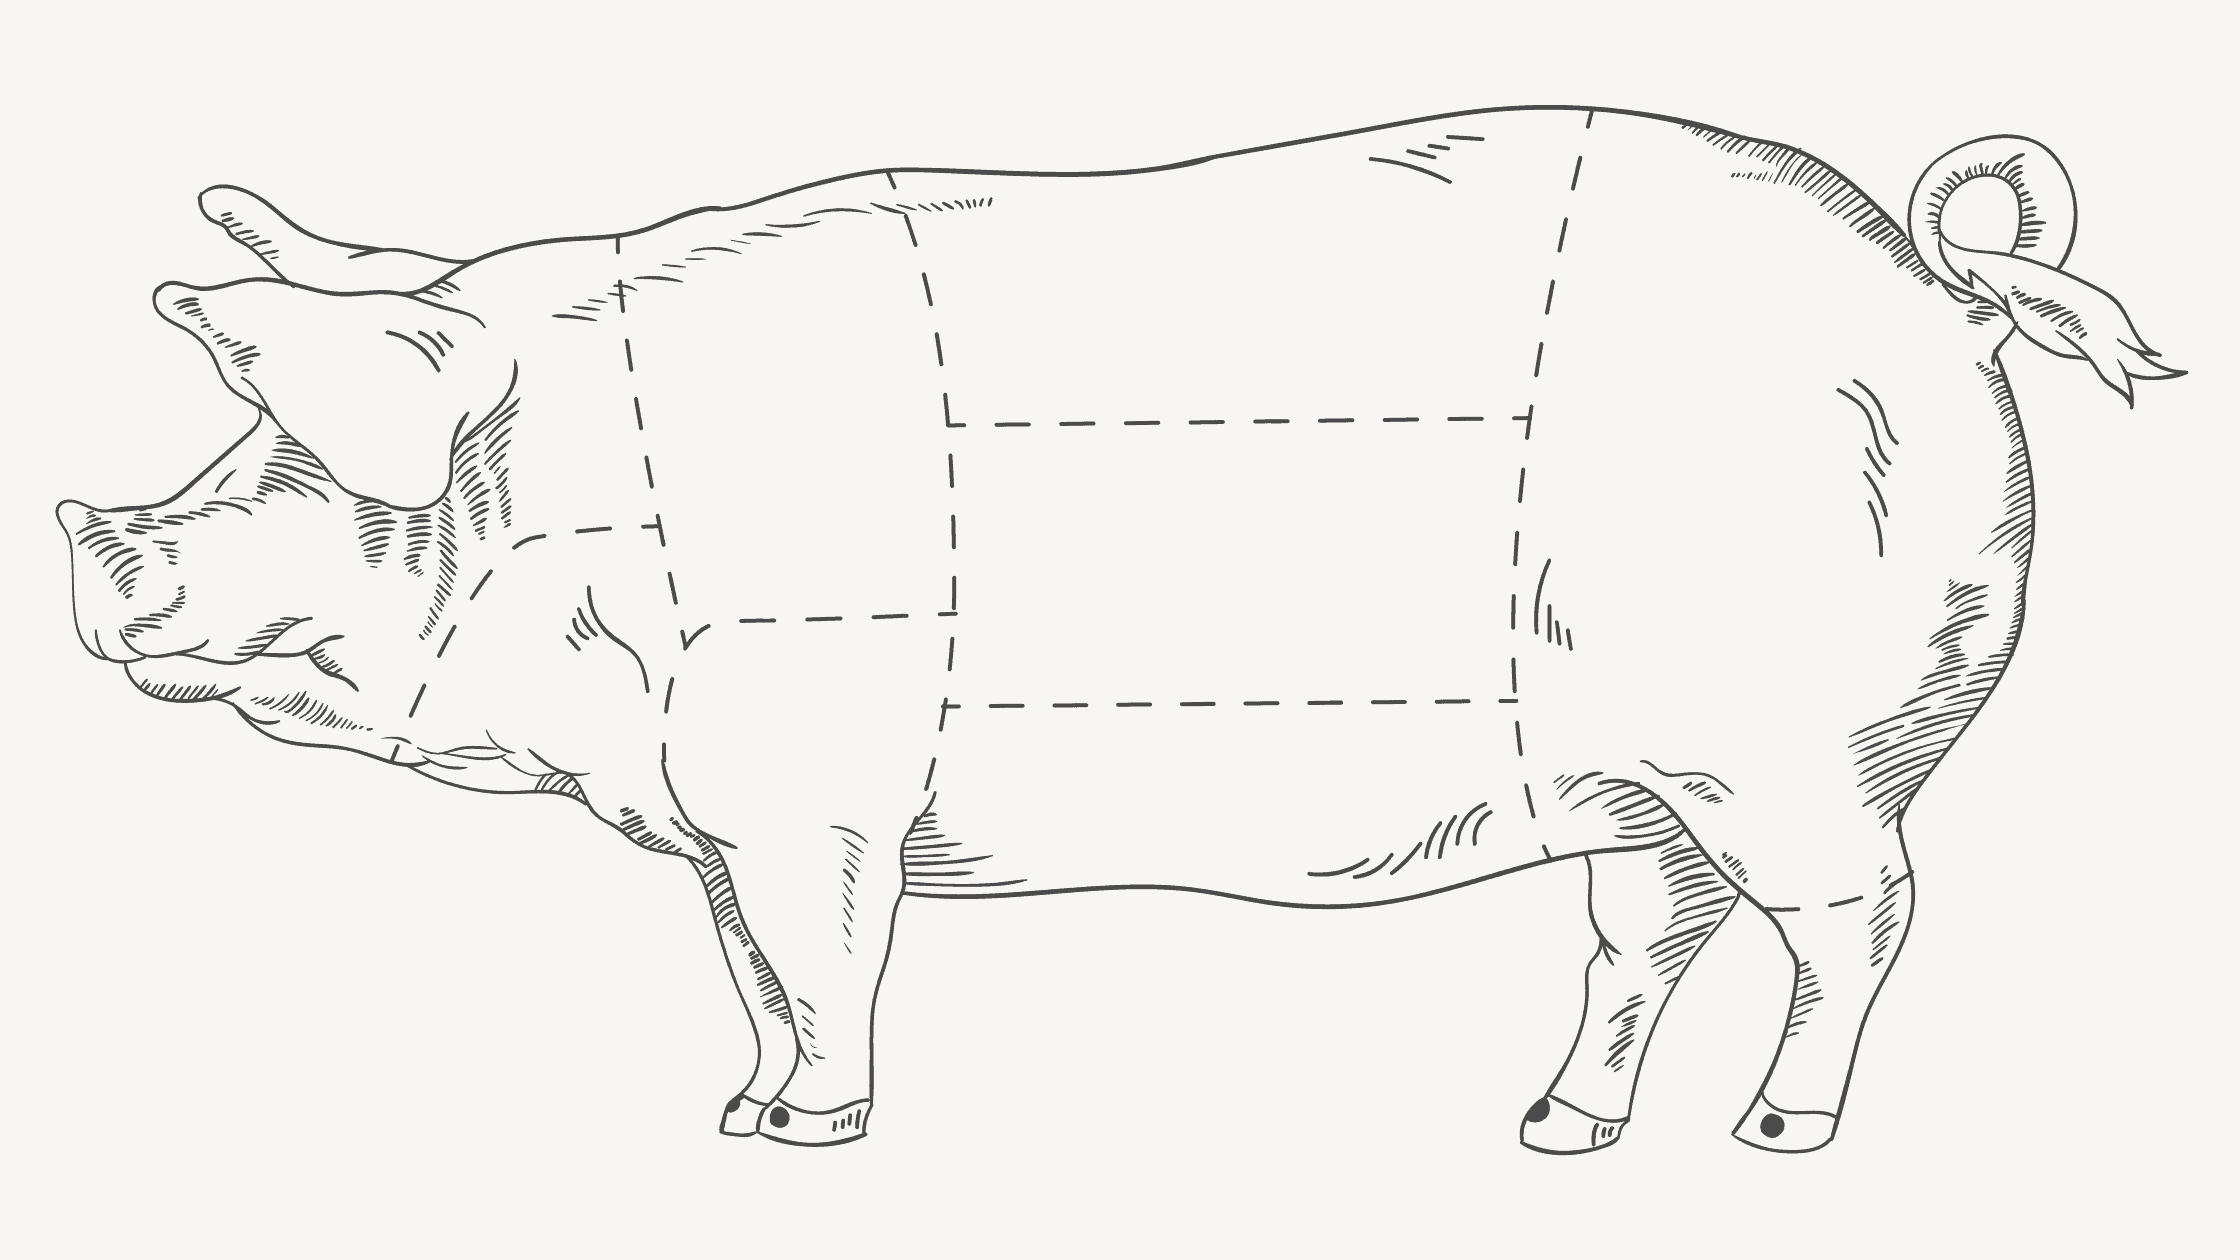 A guide to the different cuts of pork and how to prepare them! Learn where each cut is located and ideas to make them taste fabulous.